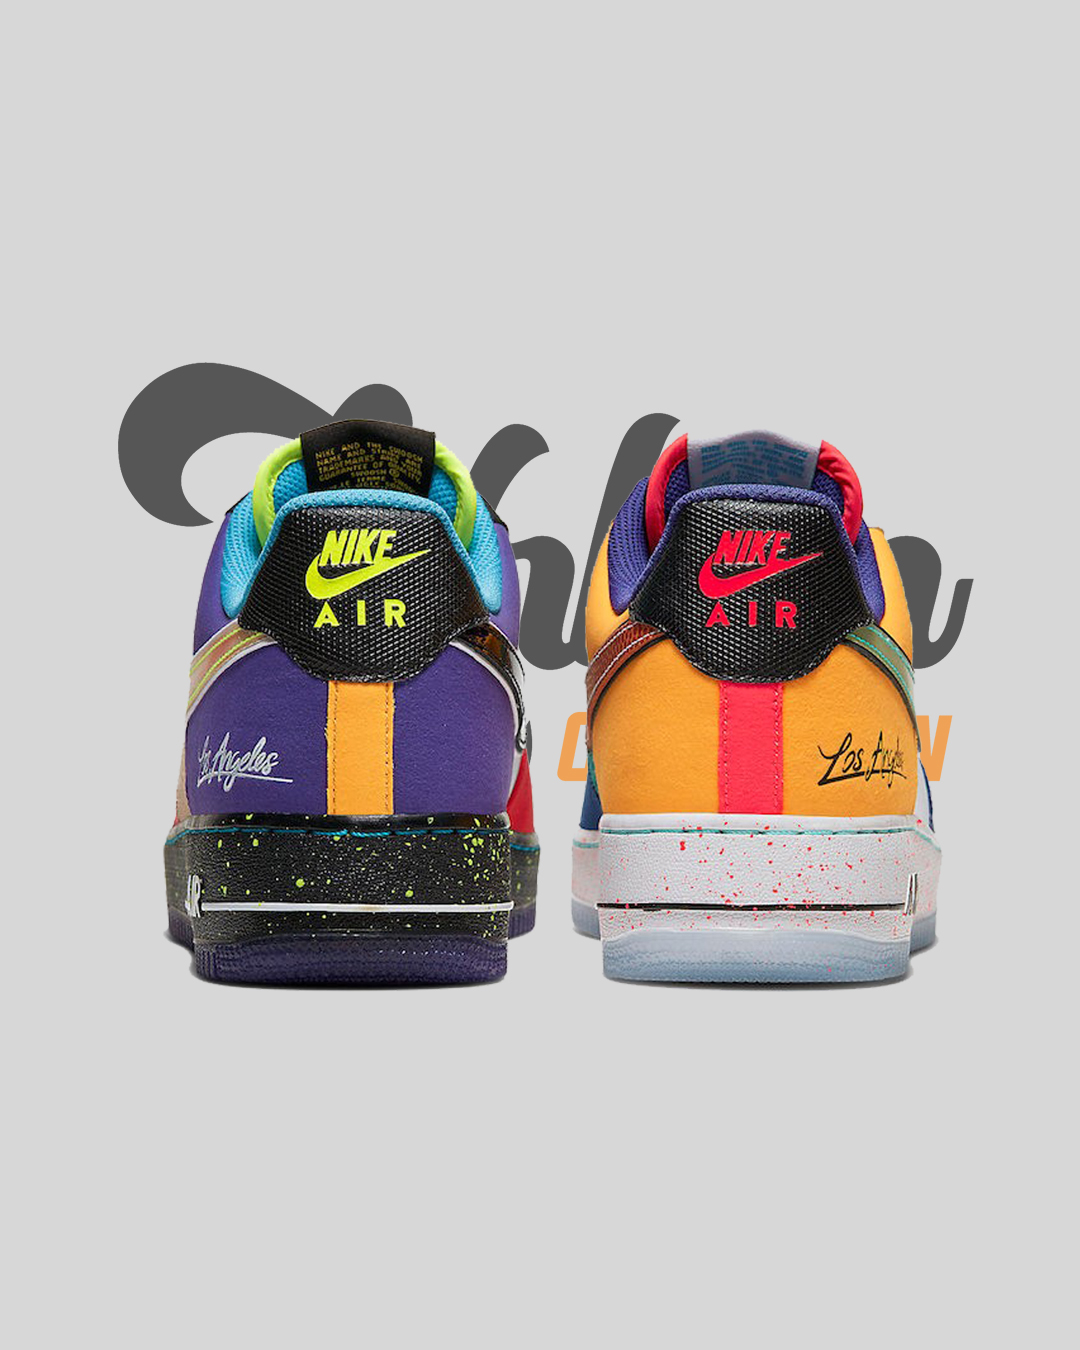 Nike Air Force 1 Los Angeles – Urban Collection